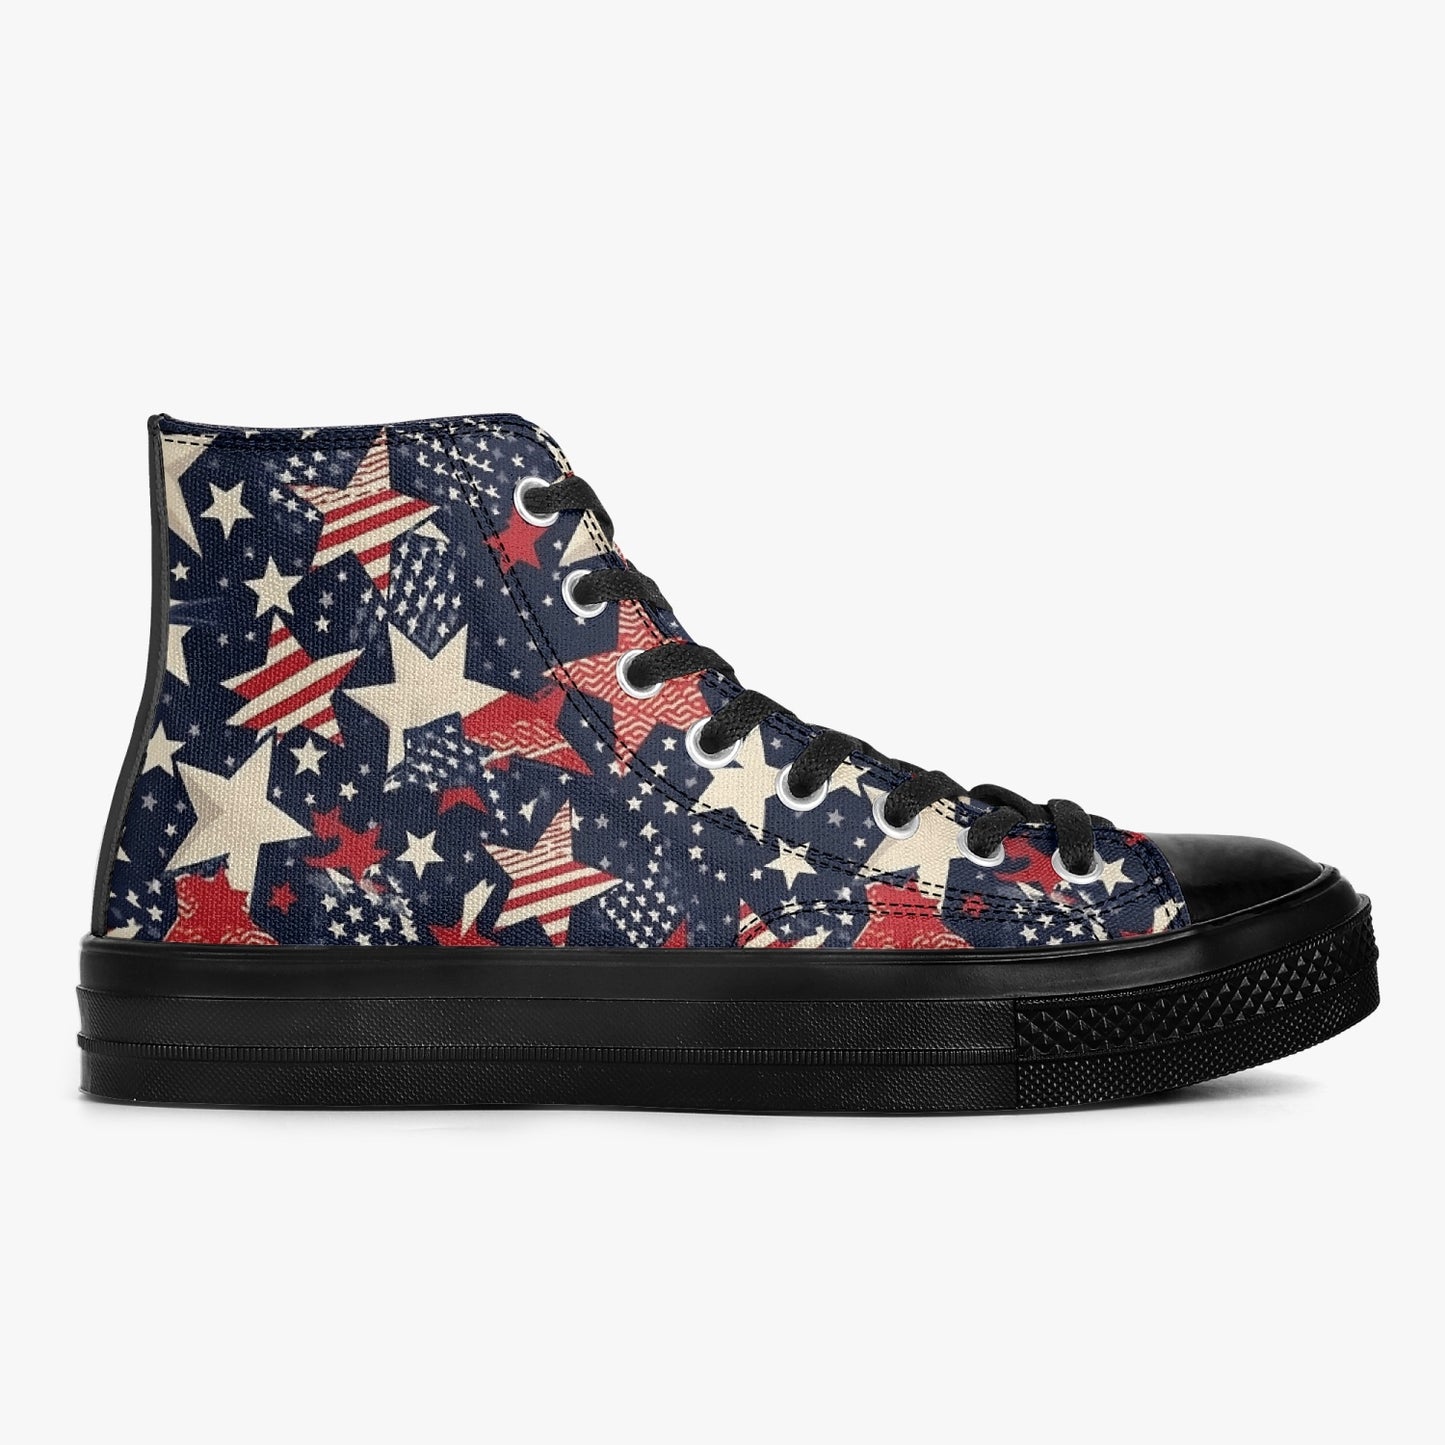 Red White Blue Stars High Top Shoes Sneakers, Men Women America USA Flag Stripes Black Lace Up Footwear Rave Canvas Streetwear Designer Starcove Fashion